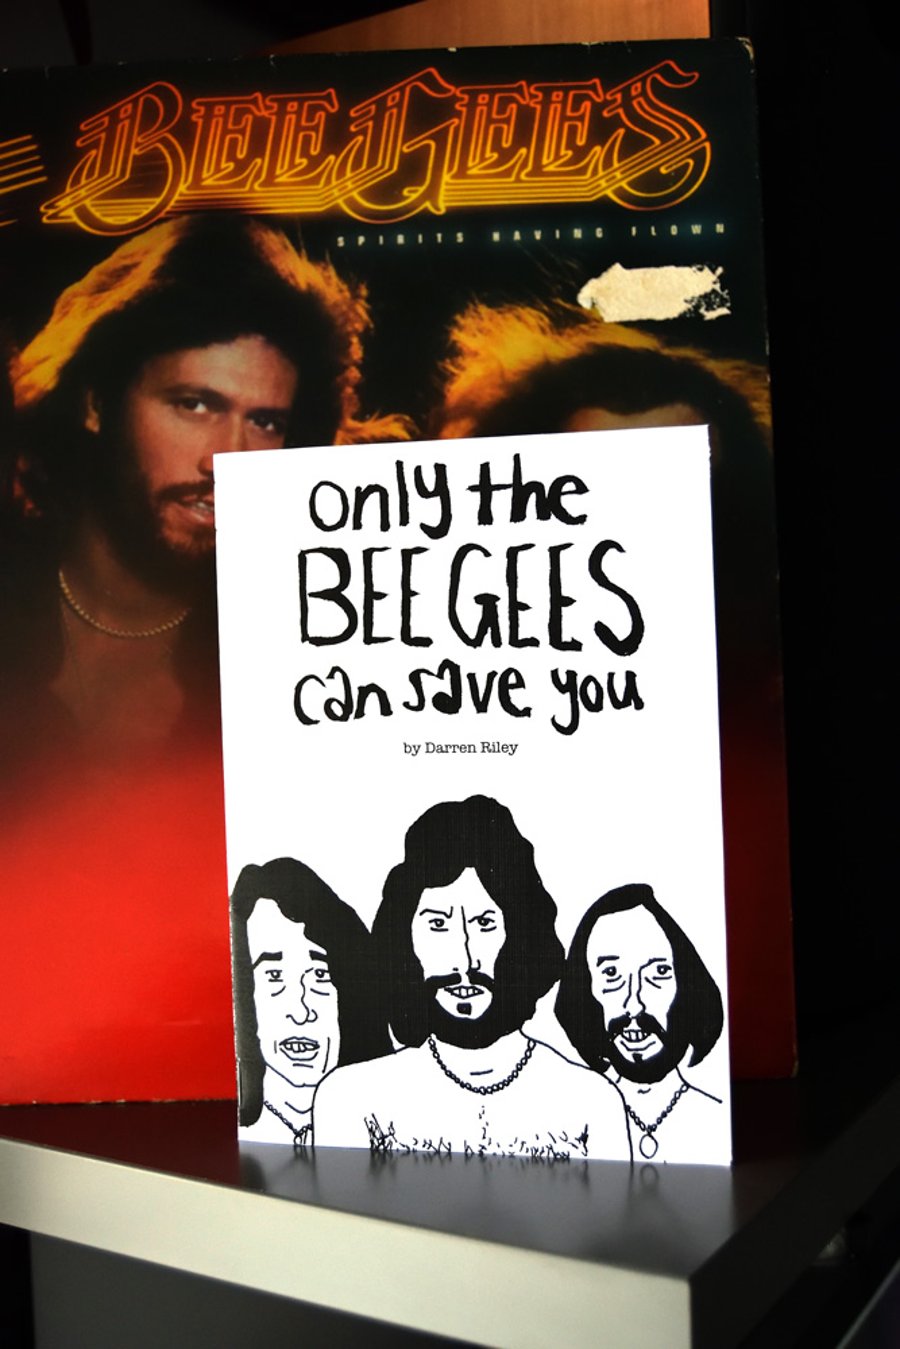 Only The Bee Gees Can Save You fanzine